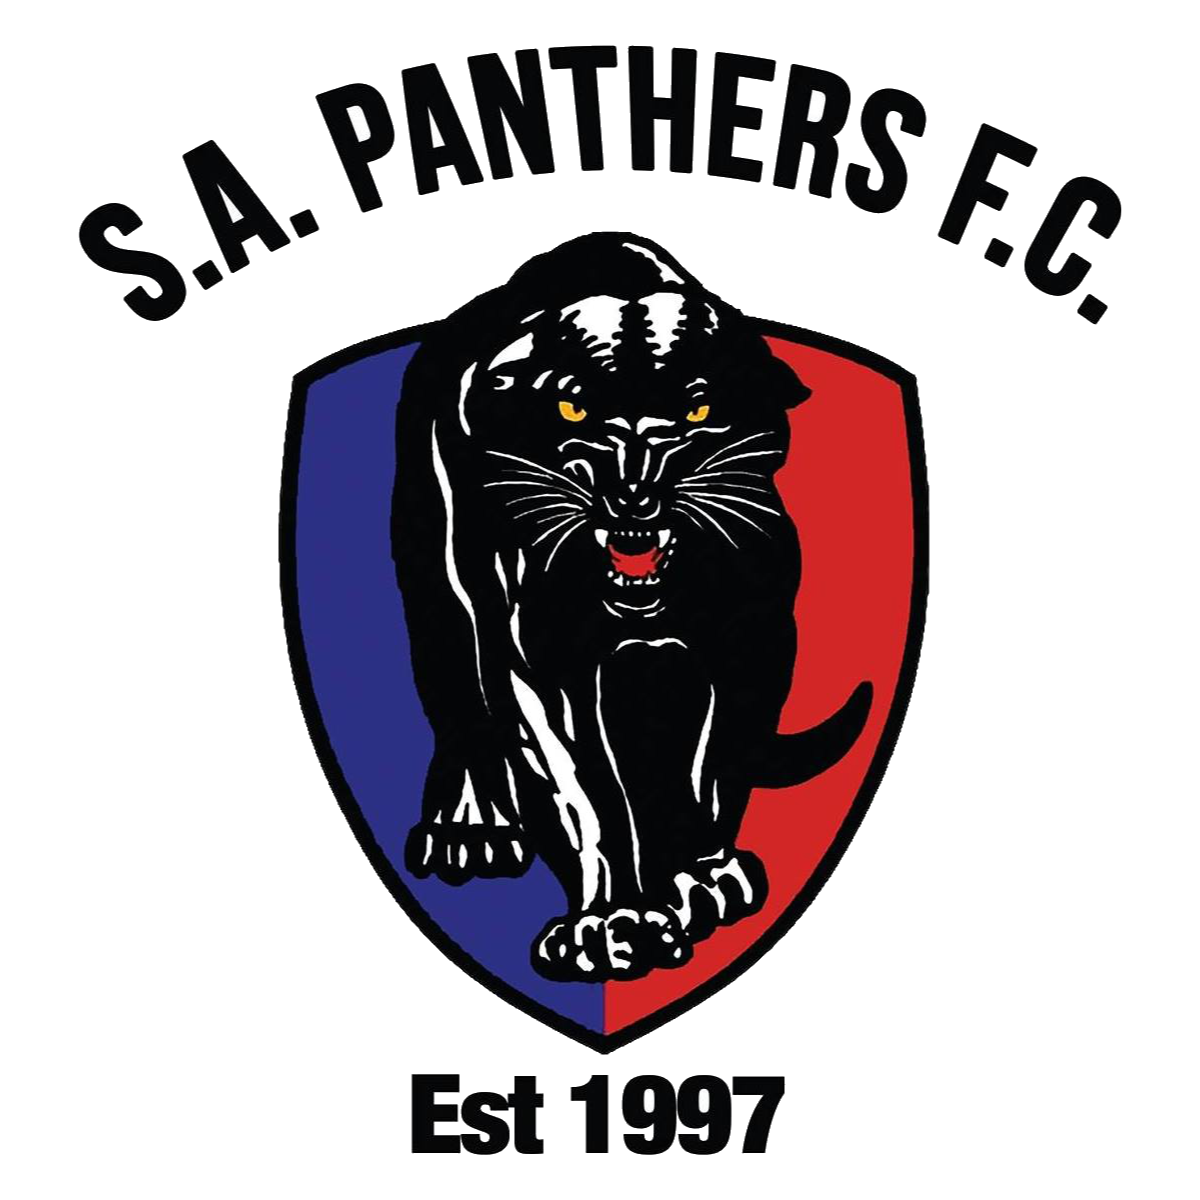 South Adelaide Panthers Football Club